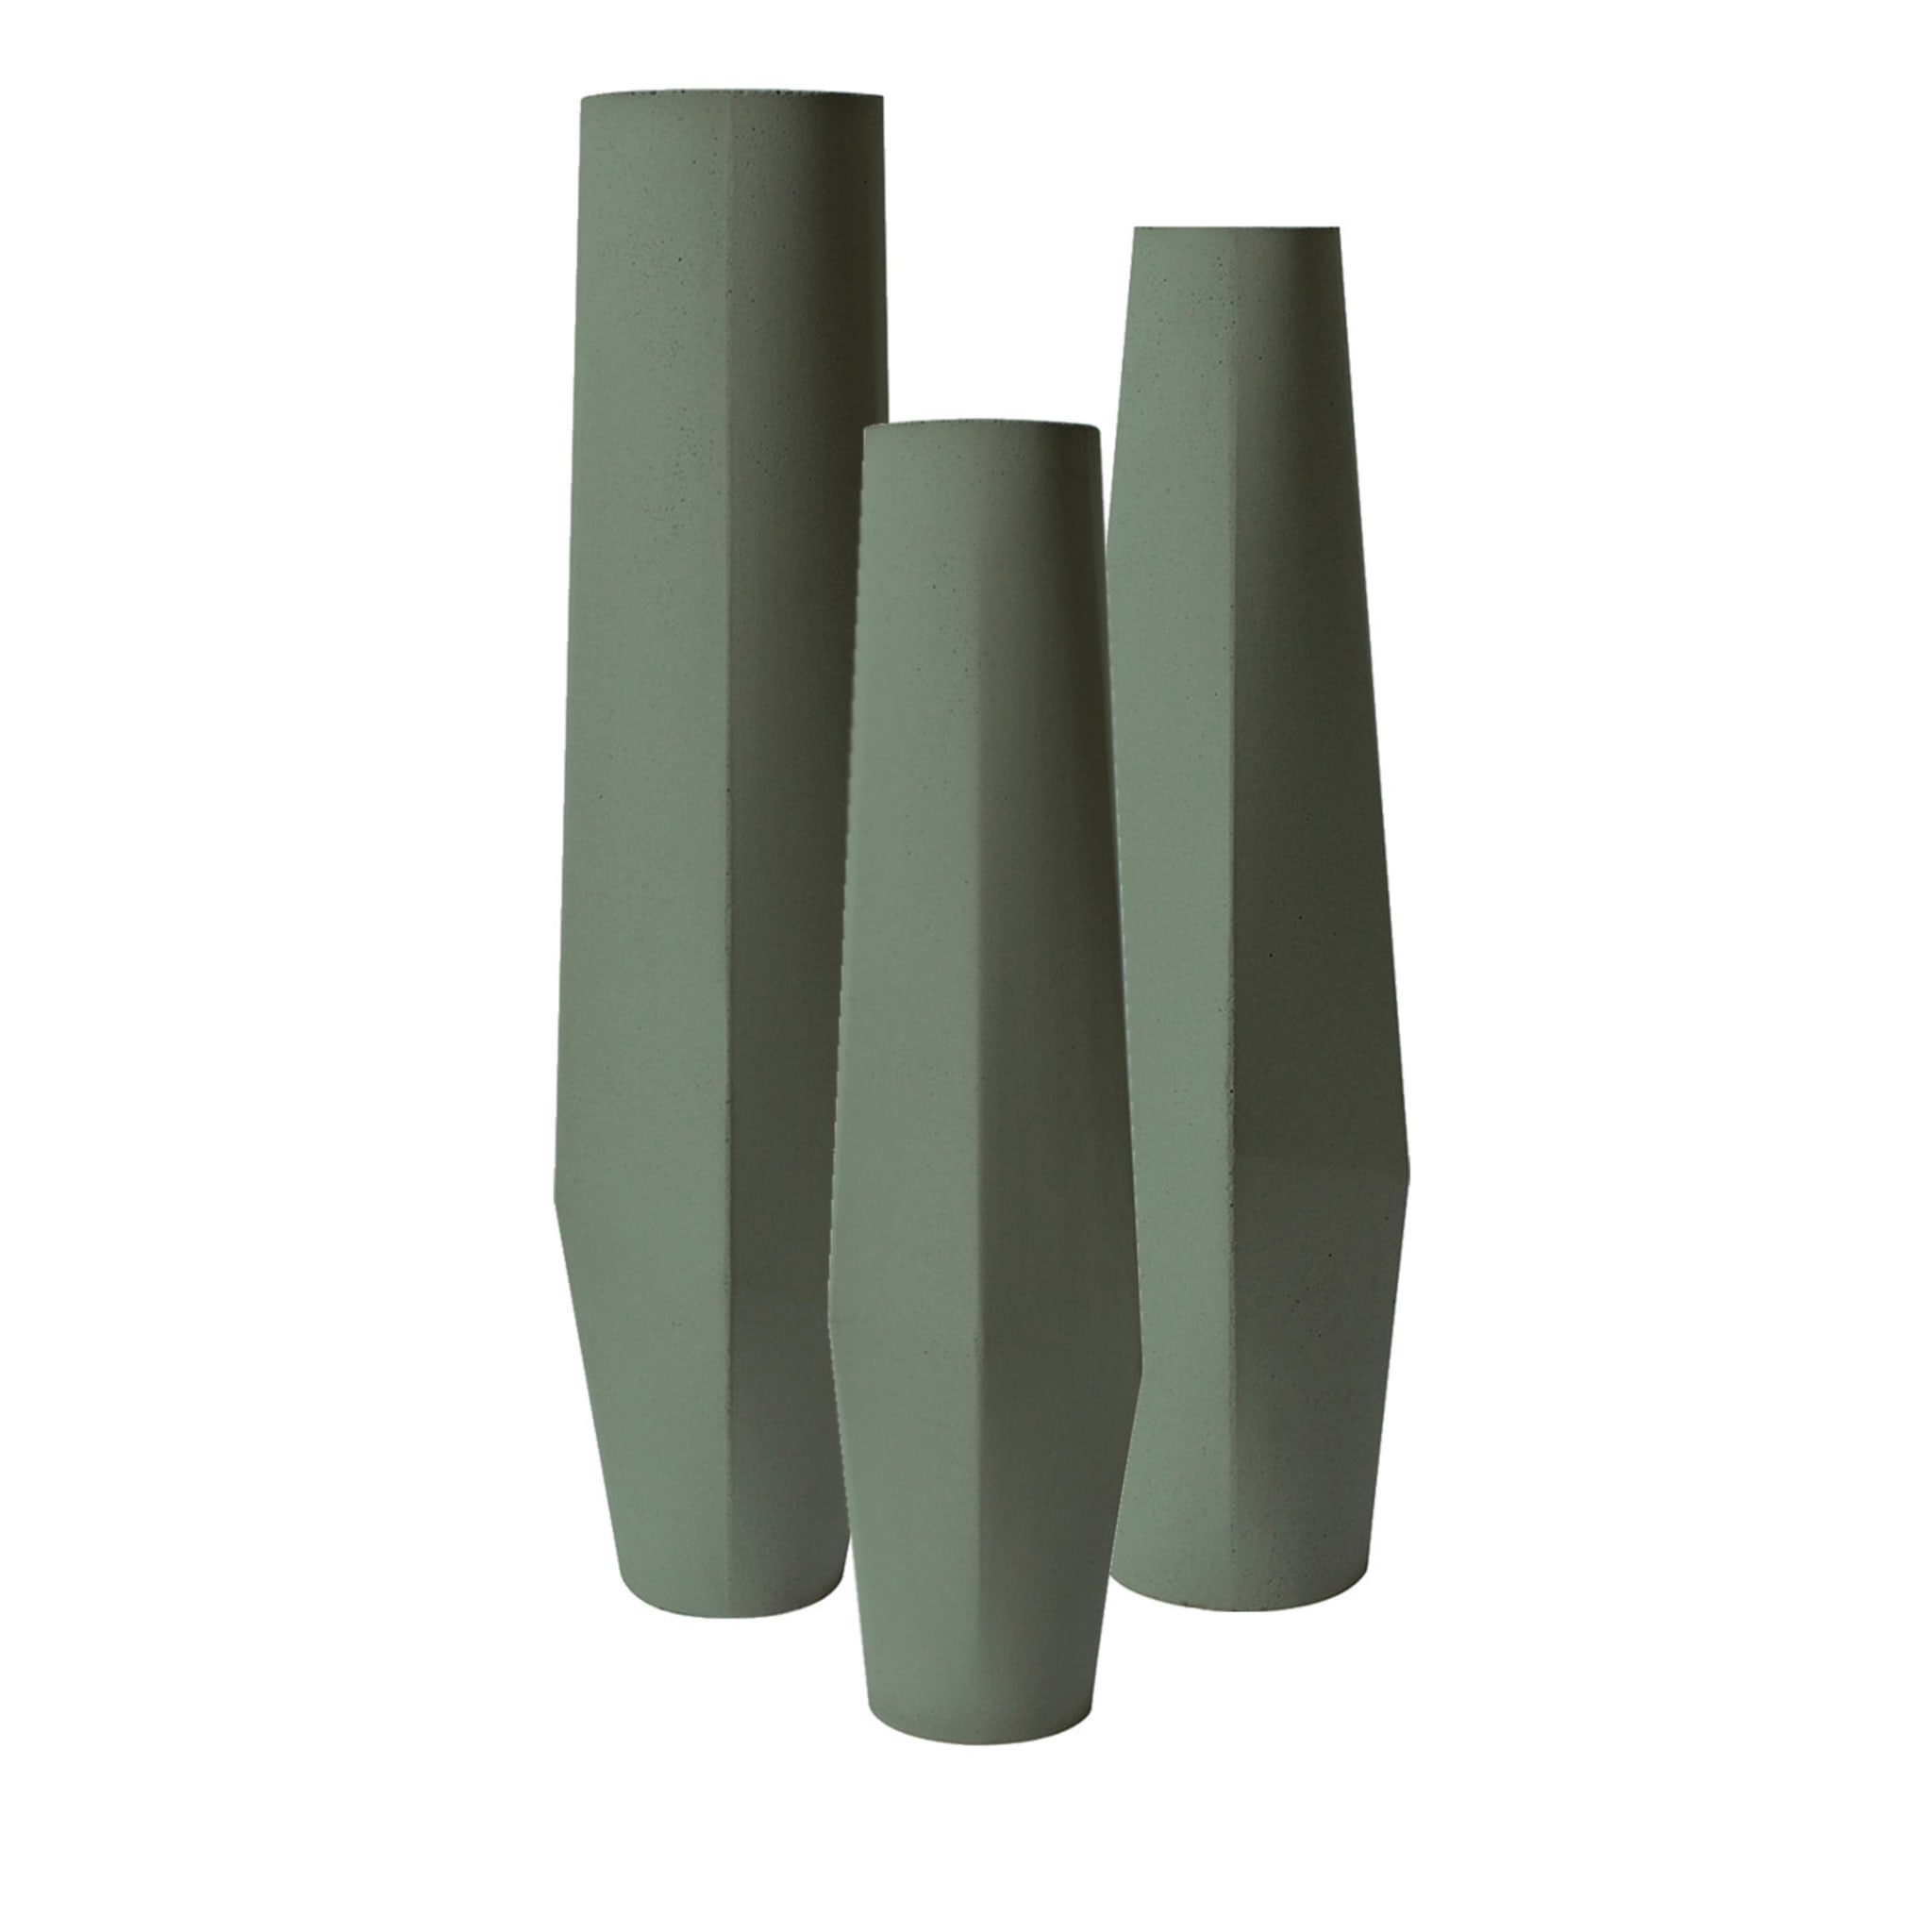 Marchigüe Green Vase Set of 3  - Main view